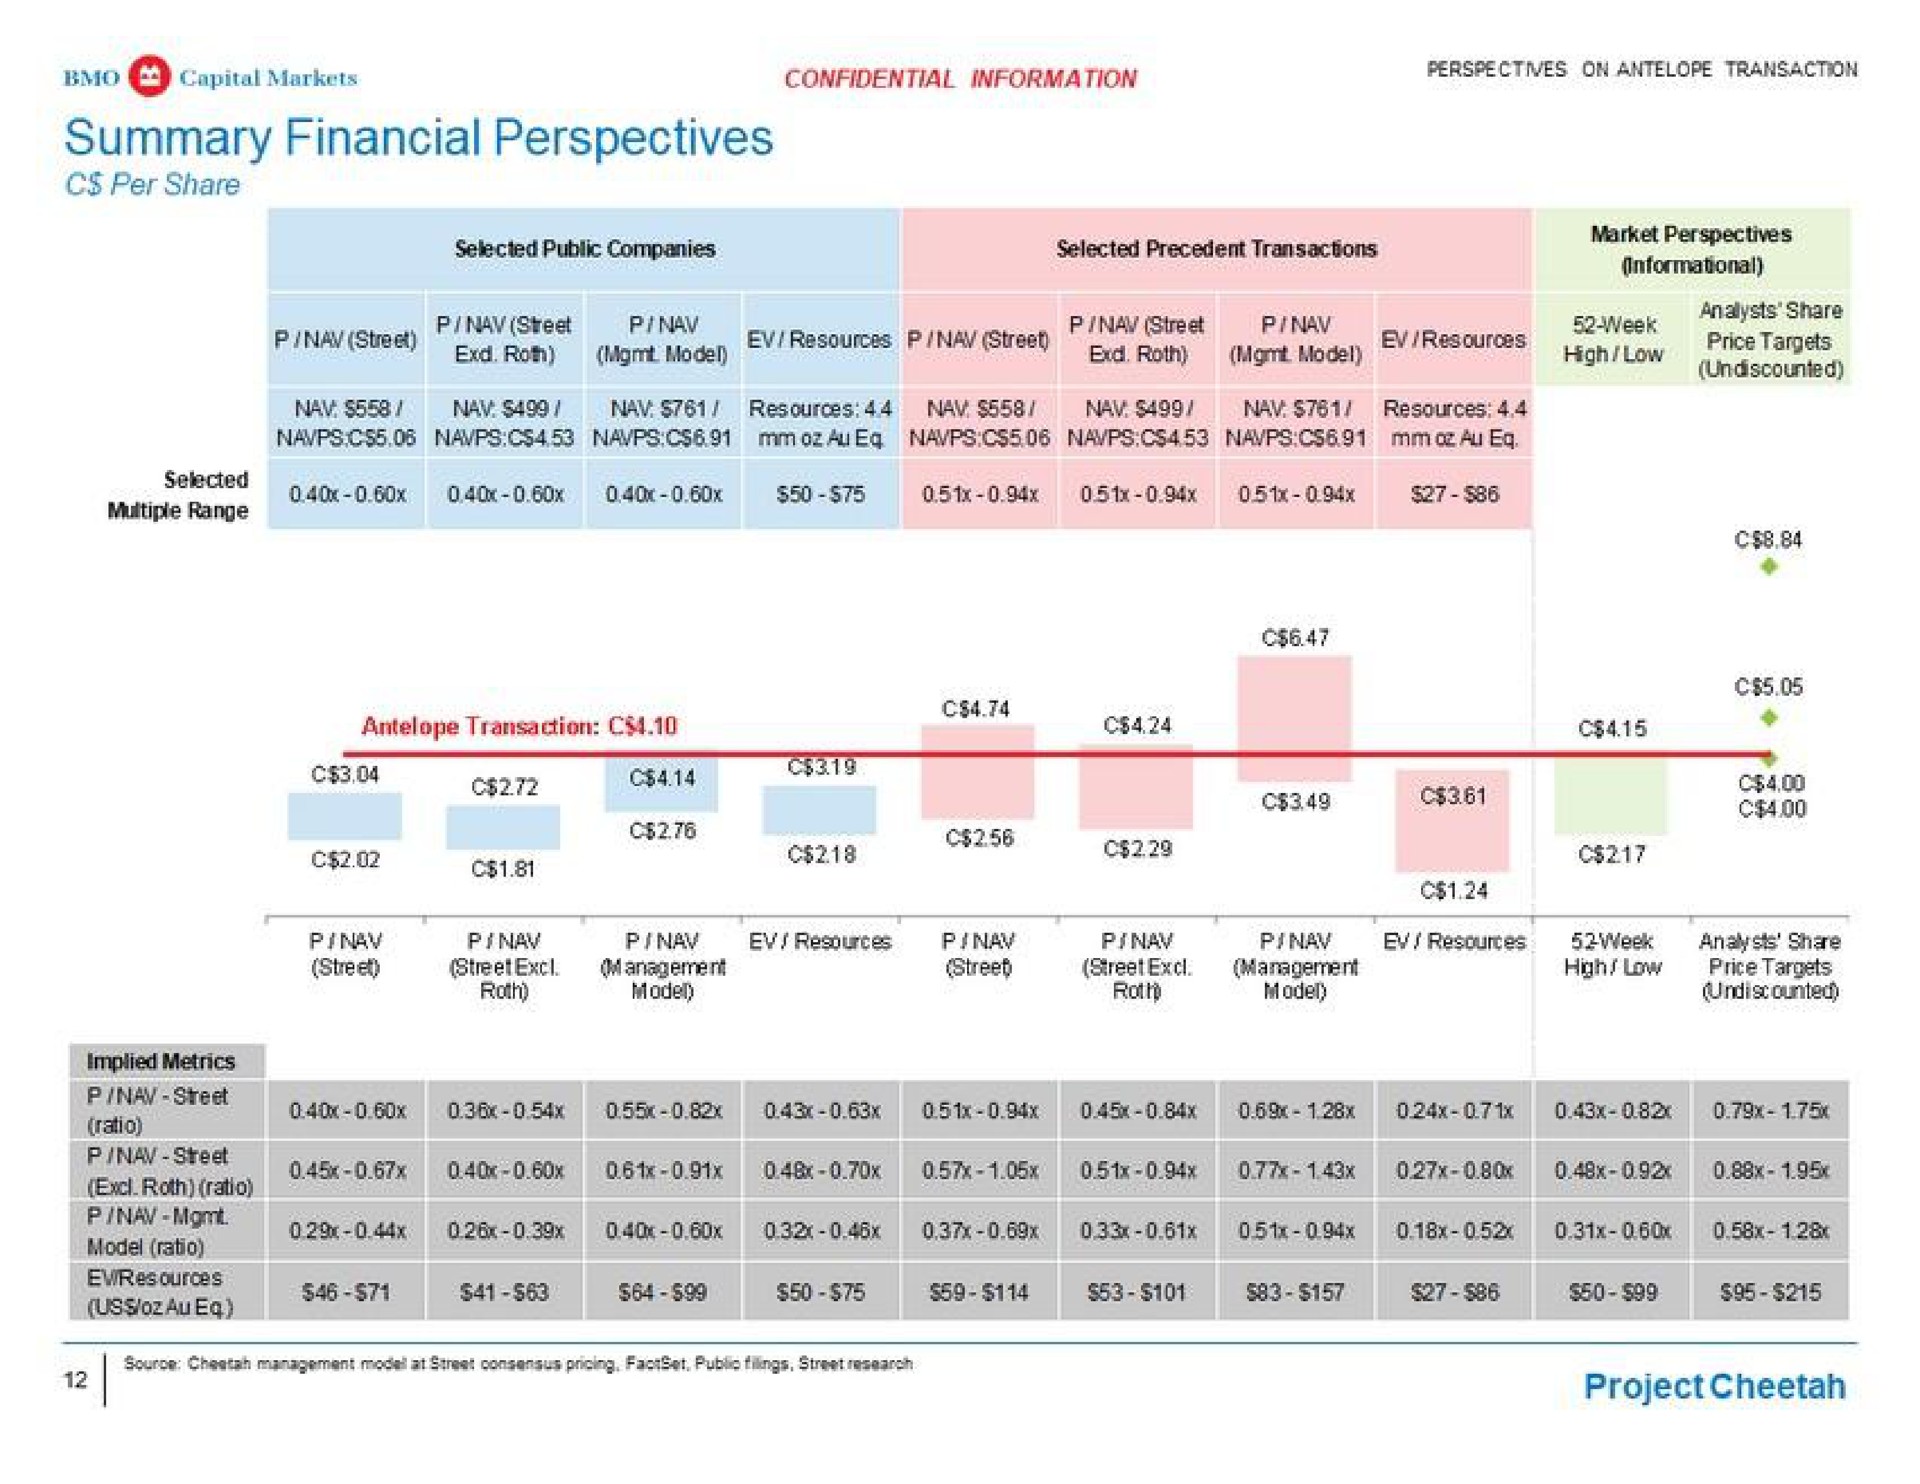 summary financial perspectives antelope transaction avail a ease ean a ill project cheetah | BMO Capital Markets